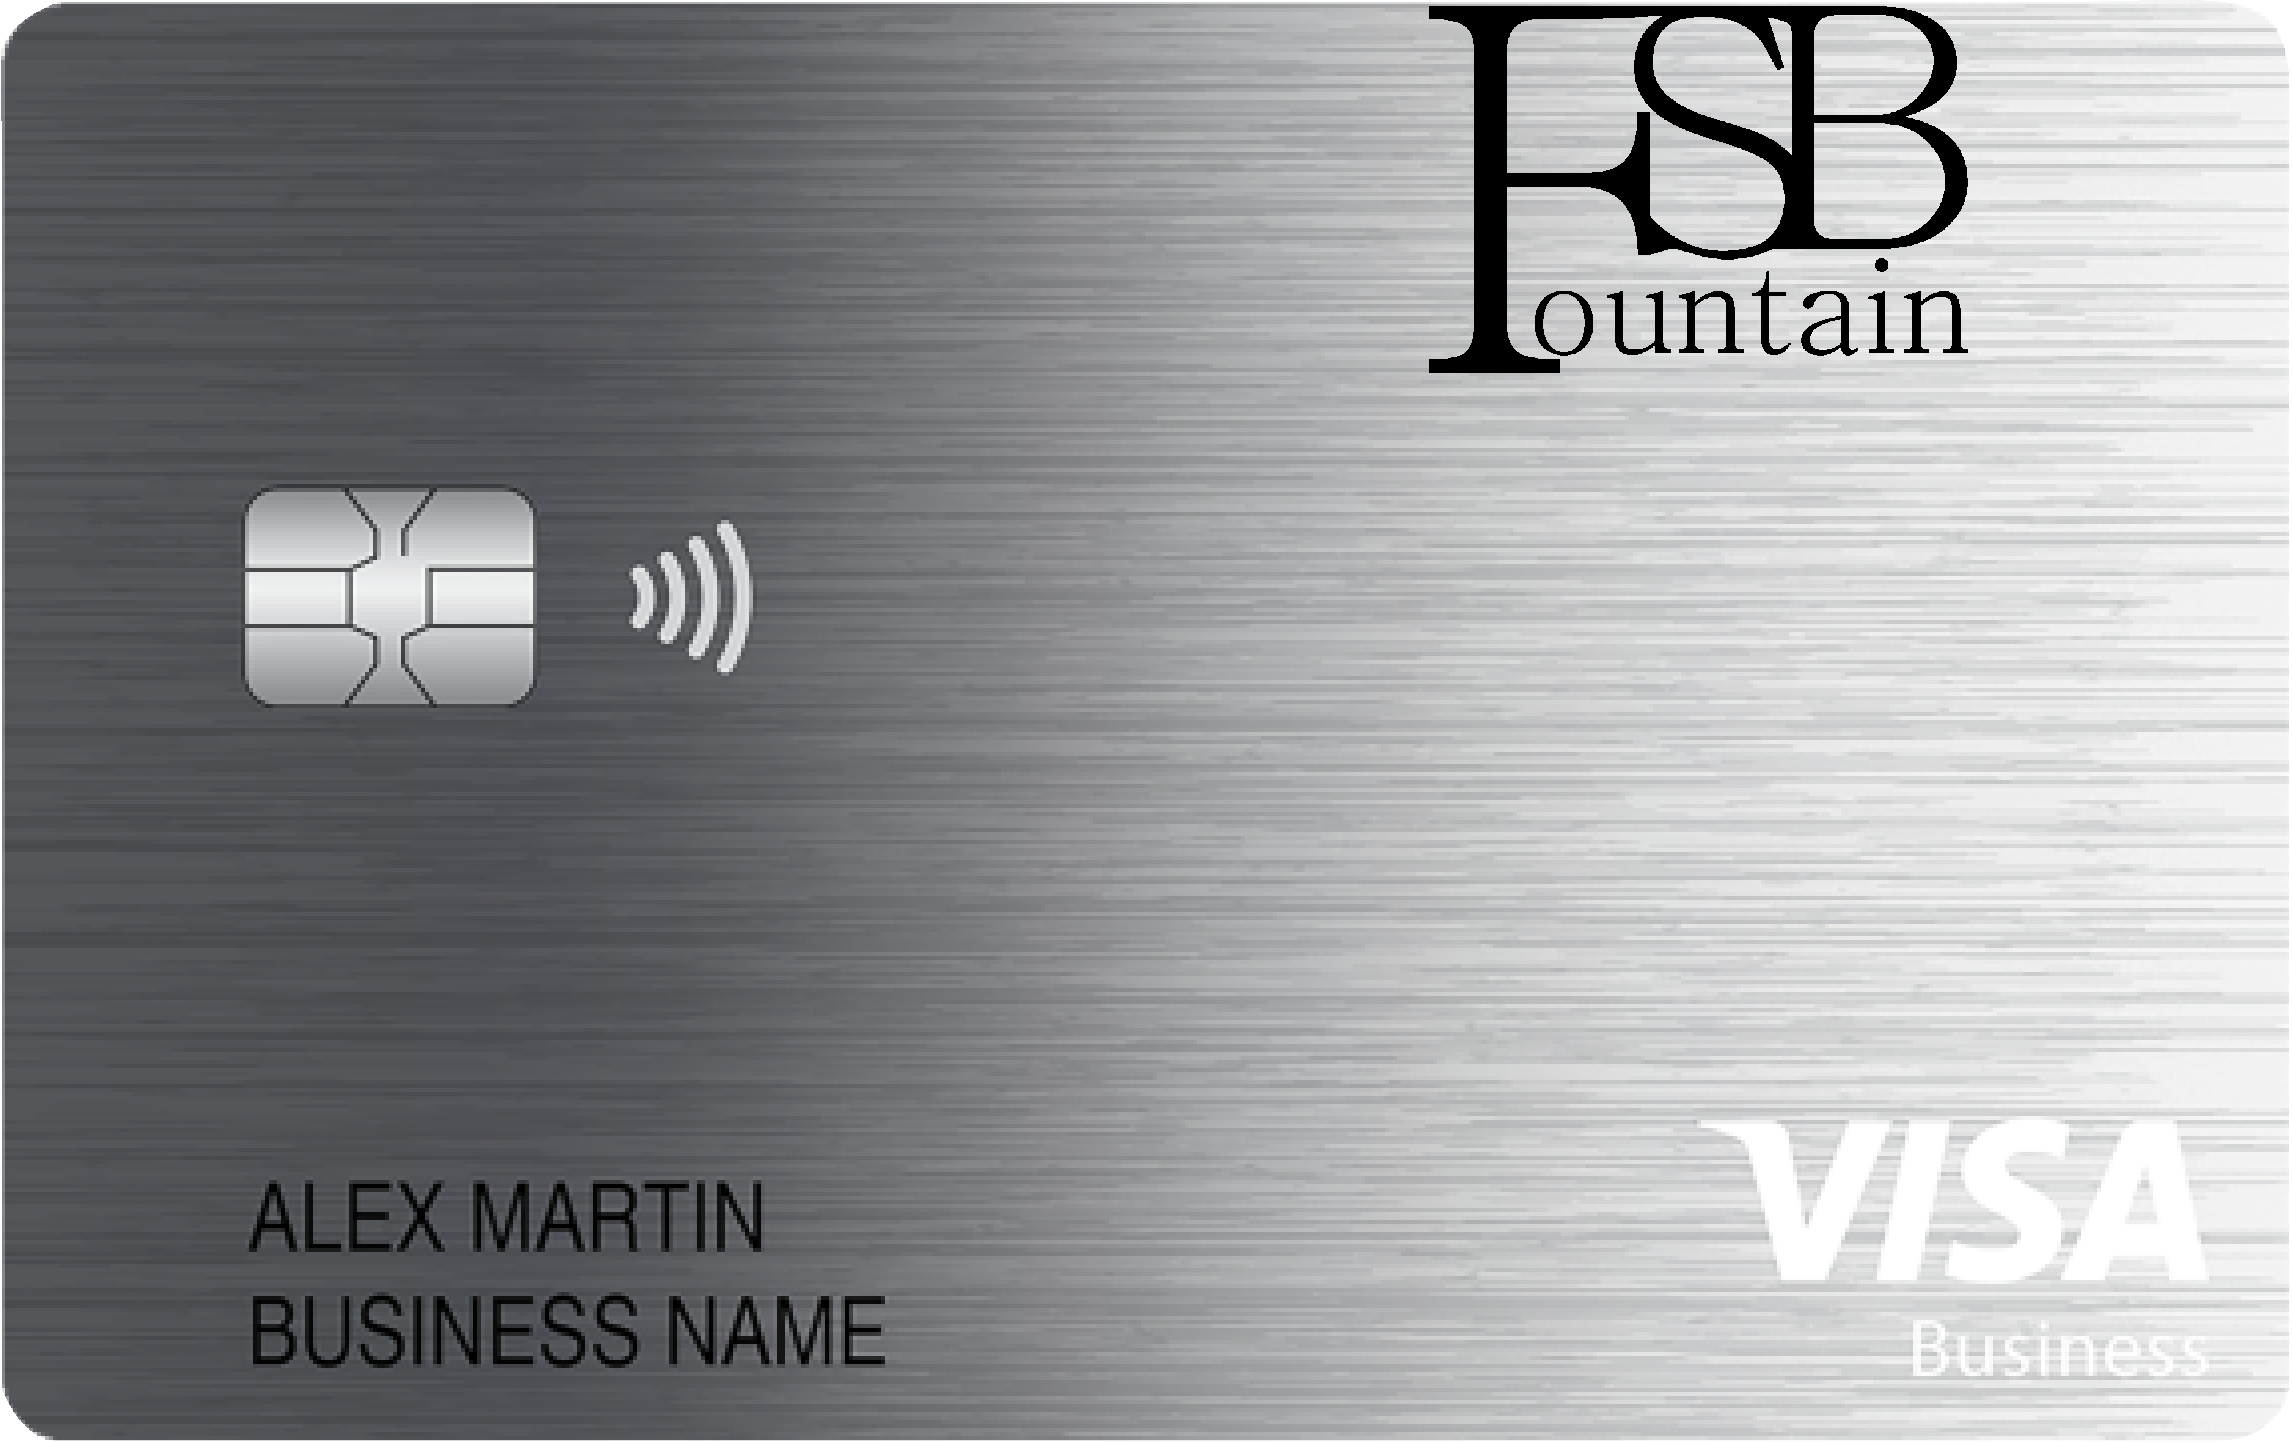 First State Bank of Fountain Business Real Rewards Card